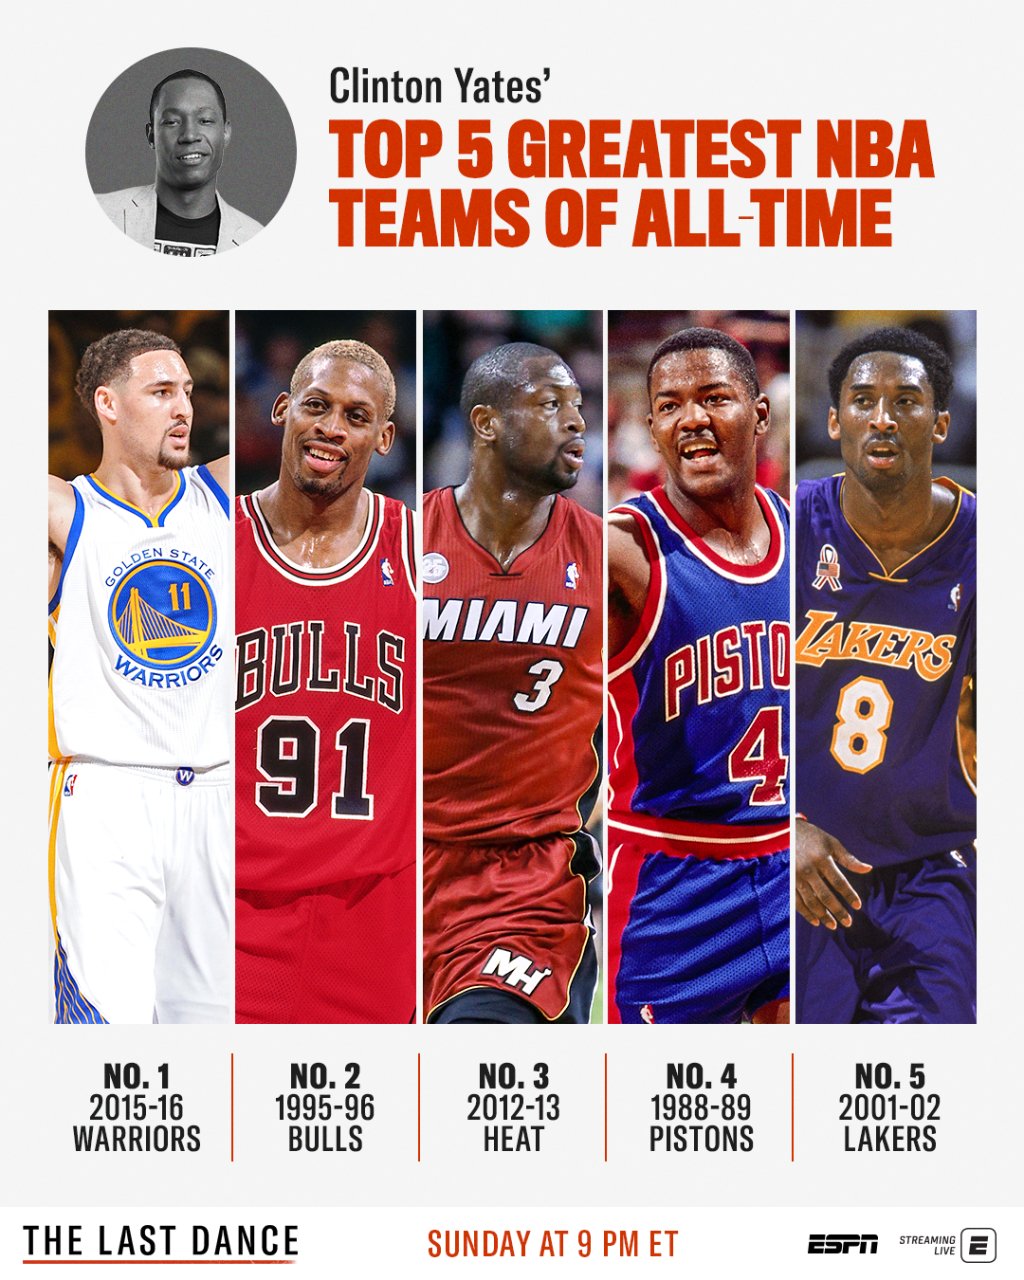 Clinton Yates on Twitter: nba all-time top 5, explained. 1. best team I've ever seen 2. best I'd ever seen to point 3. Lebron James - the greatest player